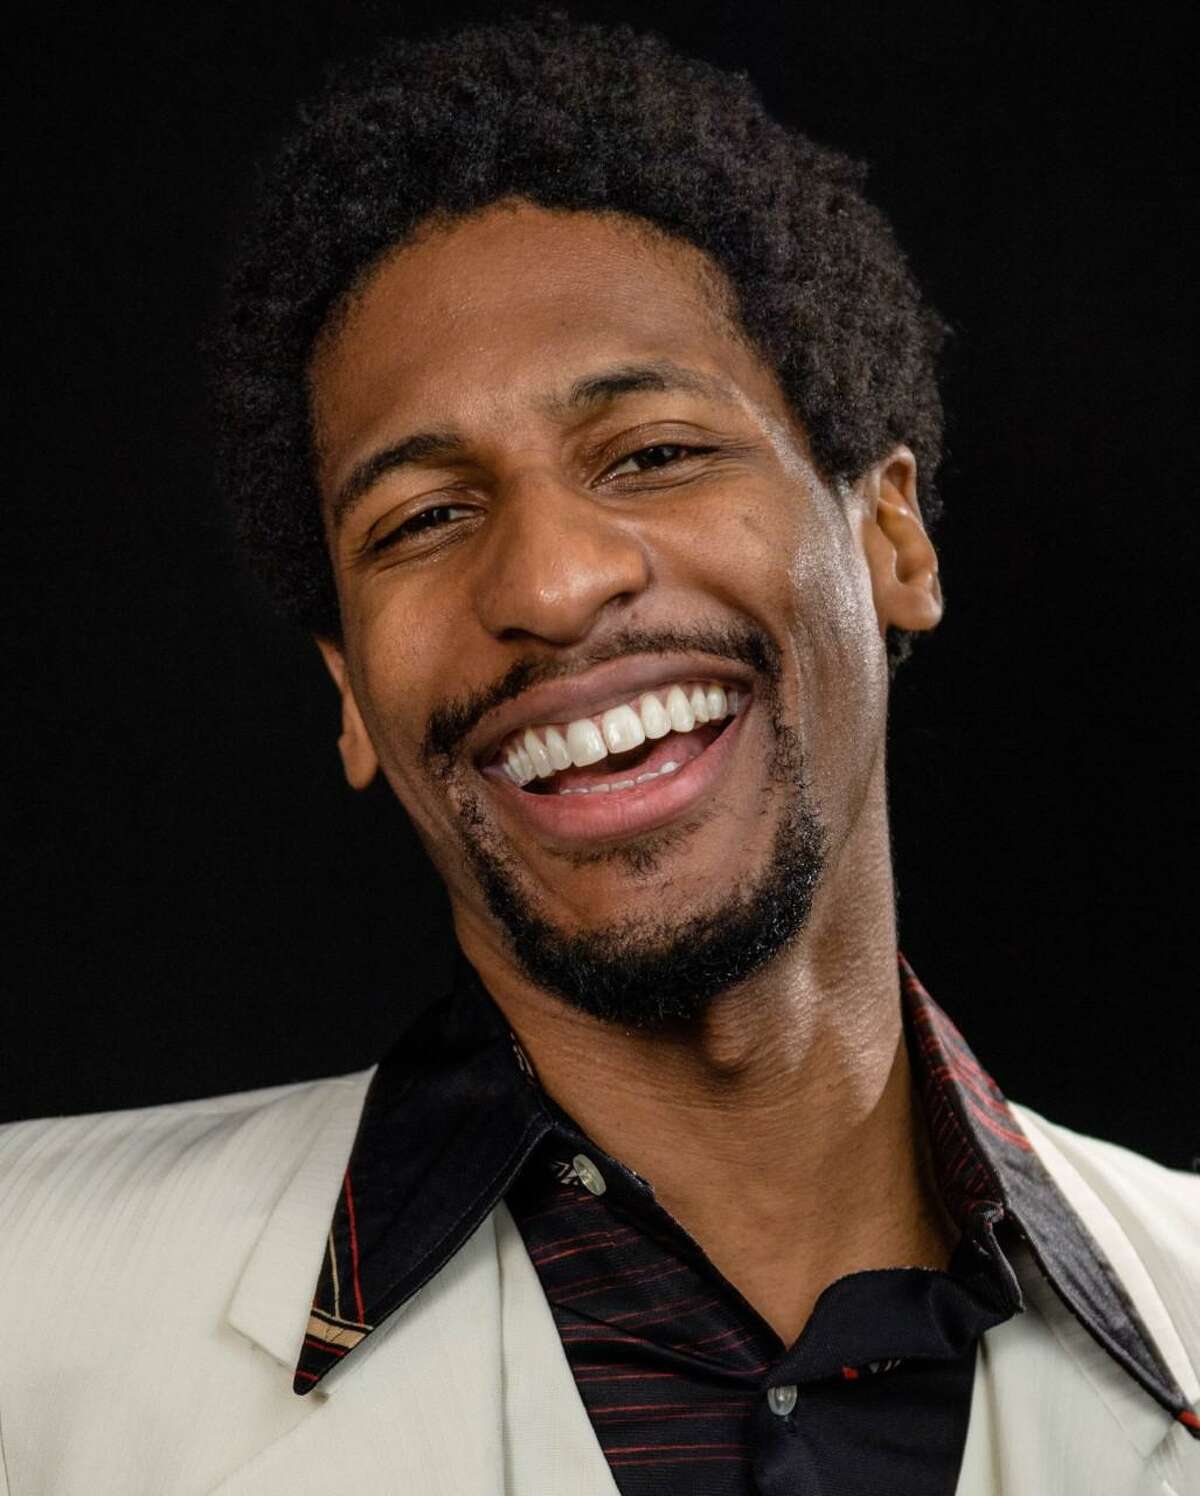 John Batiste joins the lineup of musicians for the Green River Festival in August.